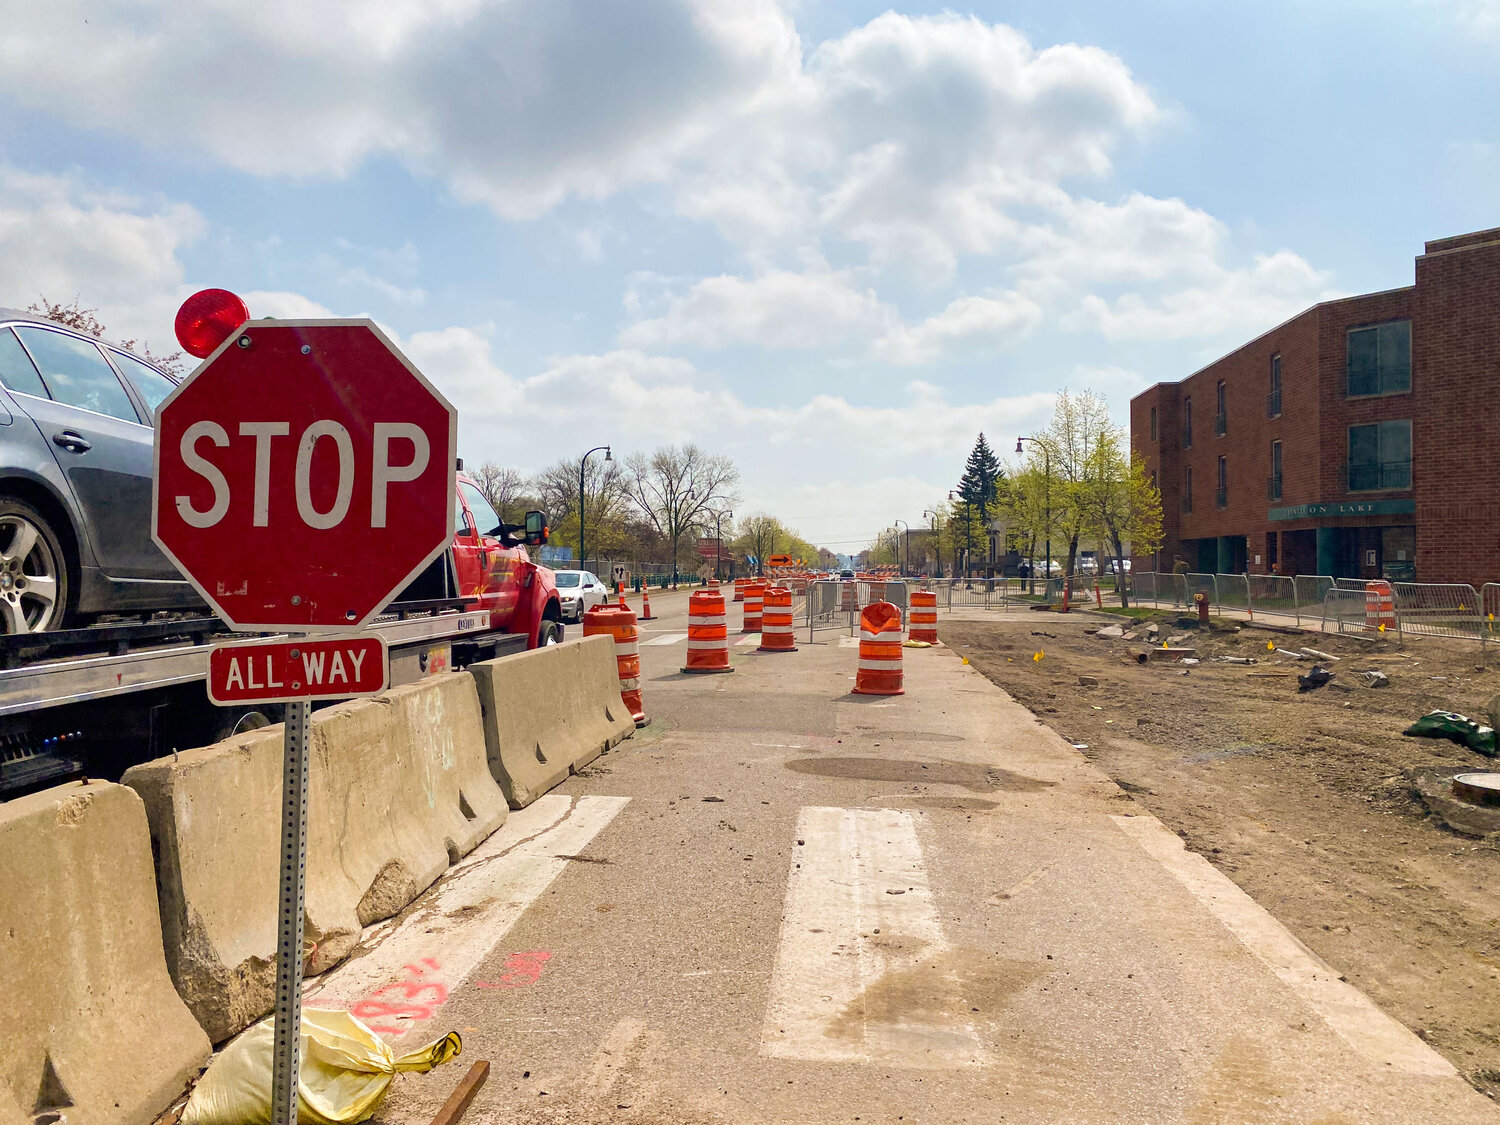 E. Lake Street is torn up in front of the East Lake Library, as work begins on new Bus Rapid Transit stations. Work will primarily be done on the route east of Hiawatha into St. Paul this year, and west of Hiawatha next year.